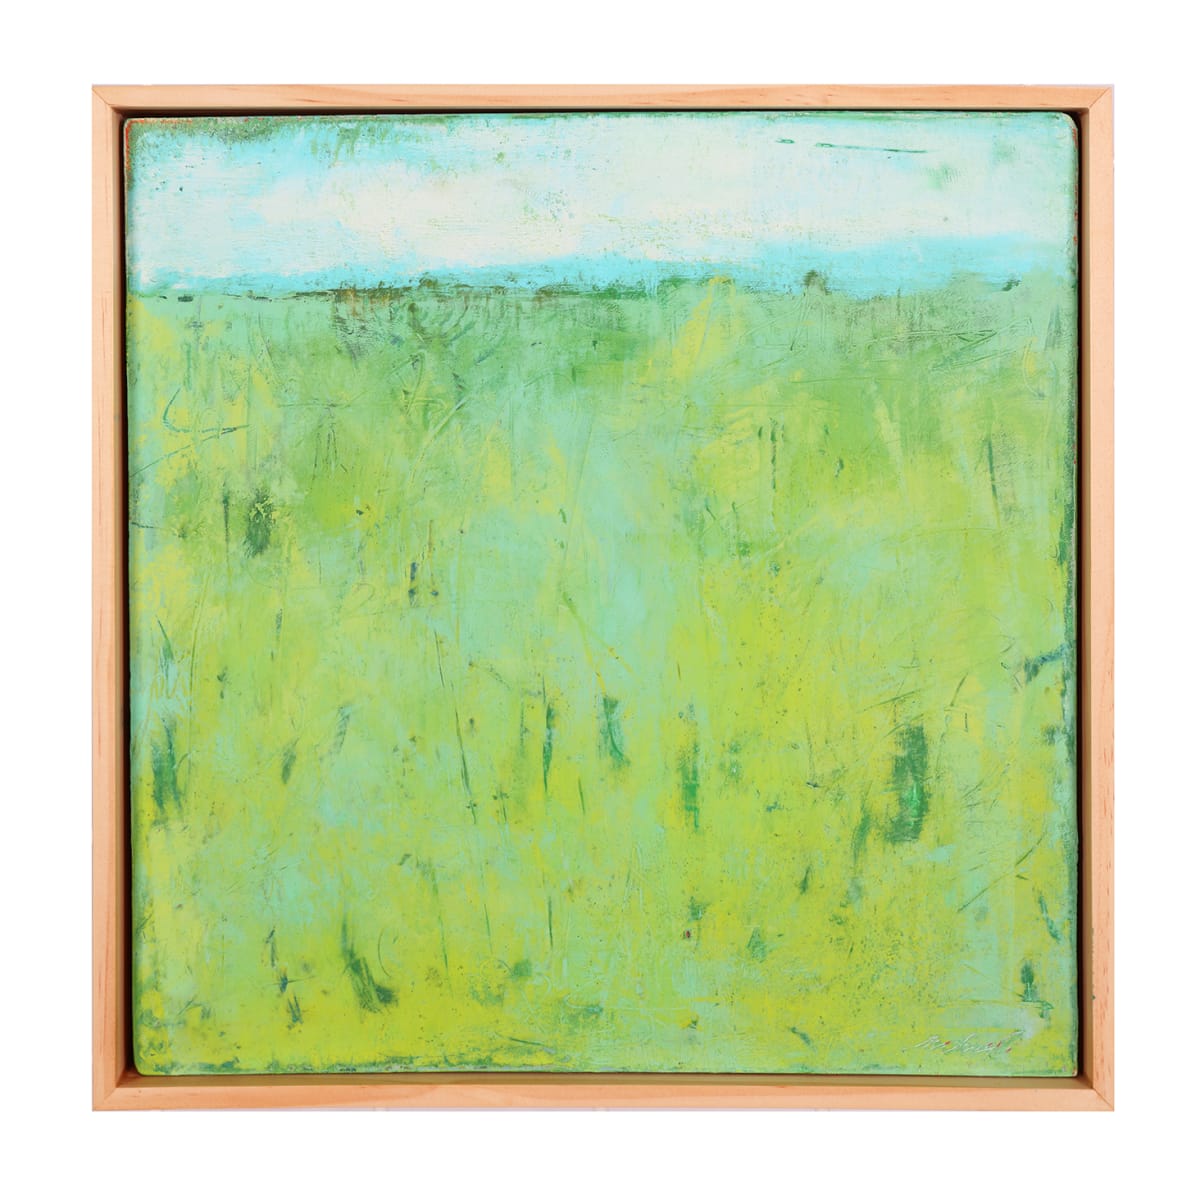 "Farm Field" by Steven McHugh  Image: Original mixed media abstract oil painting by Stevenjohn McHugh titled "Farm Field". Wood panel measures 12" x 12" x 1.5. Framed size is 12.75" x 12.75 x 2.5". Mixed media with oil stick, marker, oil, graphite, charcoal and cold wax on canvas, cardboard and Arches oil paper glued on wood panel with PH balance glue. Side of wood cradle (solid wood) is varished natural. Signed on front and back. Framed is a vanished gallery frame solid wood. Shipping included in the U.S. Shop at www.stevemchughart.com #madelineisland #stevemchughart.com #bayfieldwi #apostleislands #wisconsinartist #mixedmedia #modernart #contemporaryart #painting #contemporarypainter #paintstudio #artgallery #fineart #abstractart #artcollector #originalart #contemporaryartwork #studio #artgallery #artcollector #artadvisor #artcurator #abstraction #abstractart #abstractpainting #artcollector #artistoninstagram #stevenjohnmchugh #Aninhinabewakilands #artistinthewoods #lakegitchegumee